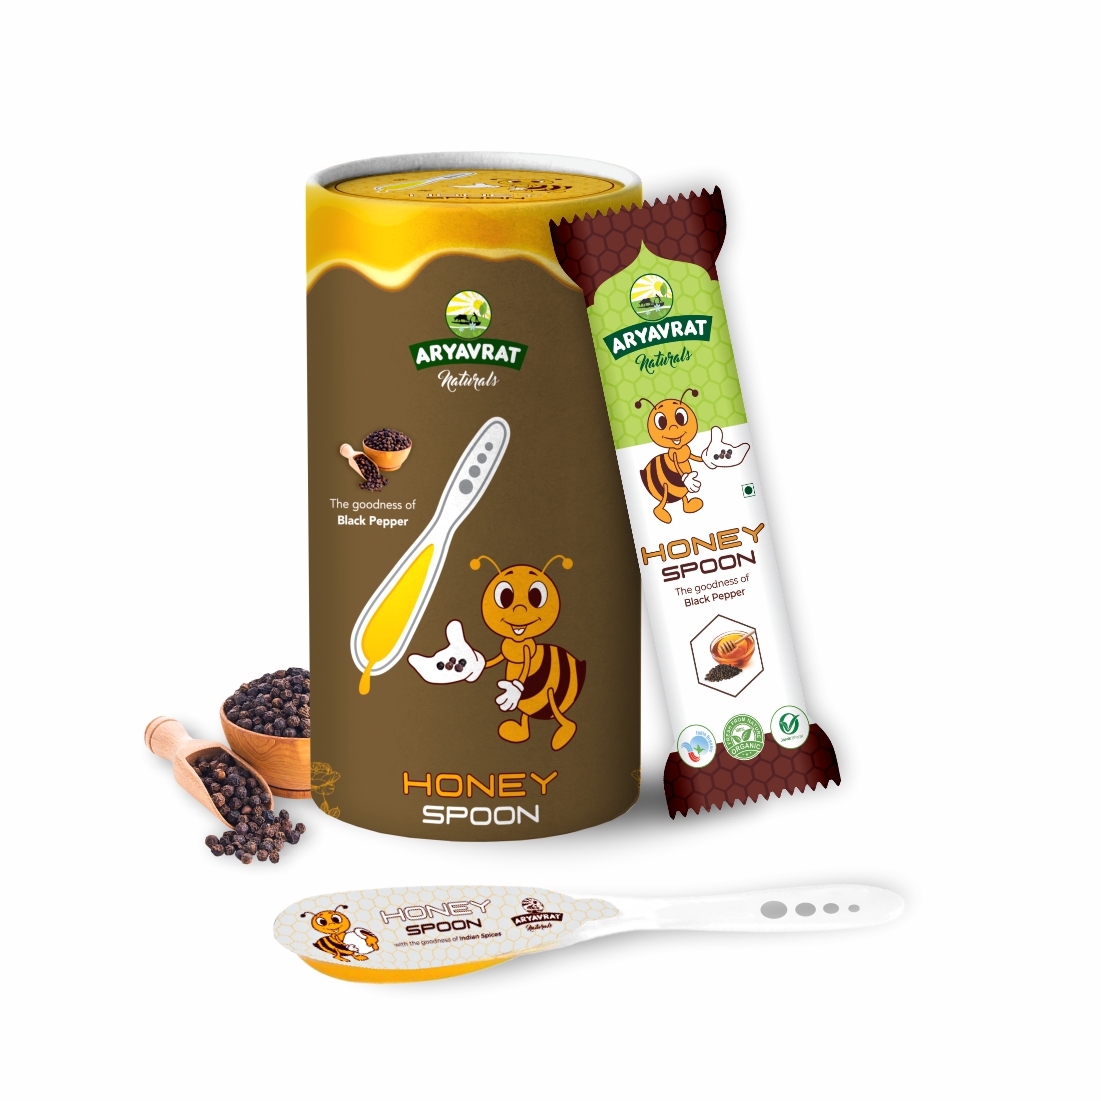 Buy Aryavrat Naturals - Black Pepper-Kali Mirch Honey Spoon 100% Pure Organic and Natural Pack of Honey Spoons at Best Price Online